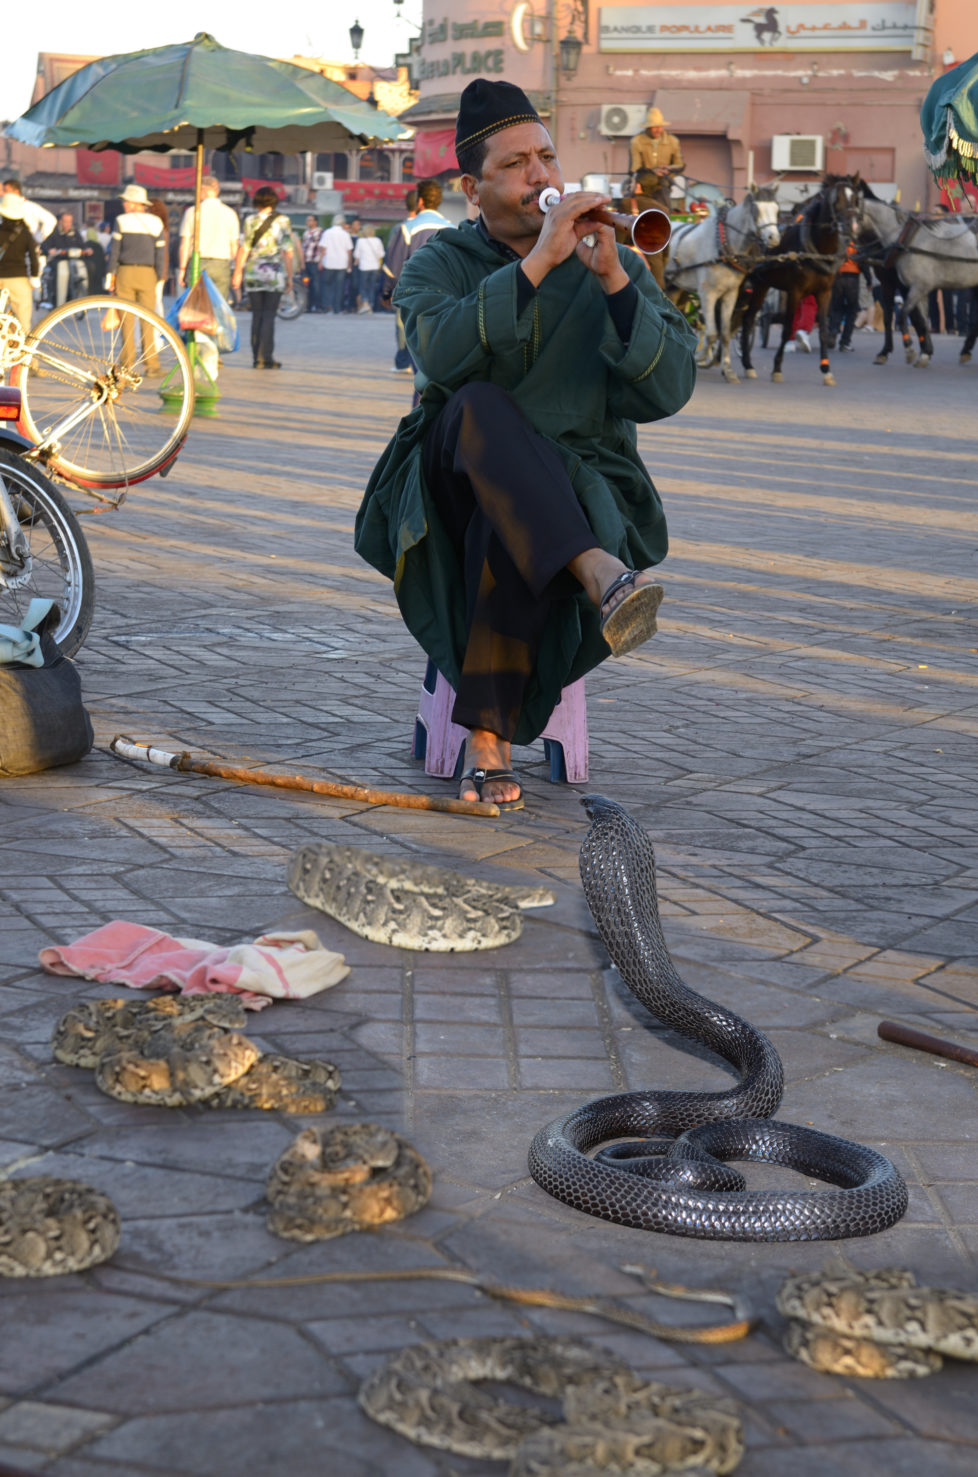 Coiled black cobra and other snakes being charmed by a flute in Place Djemaa el Fna Marrakech. (Photo by: Education Images/UIG via Getty Images)